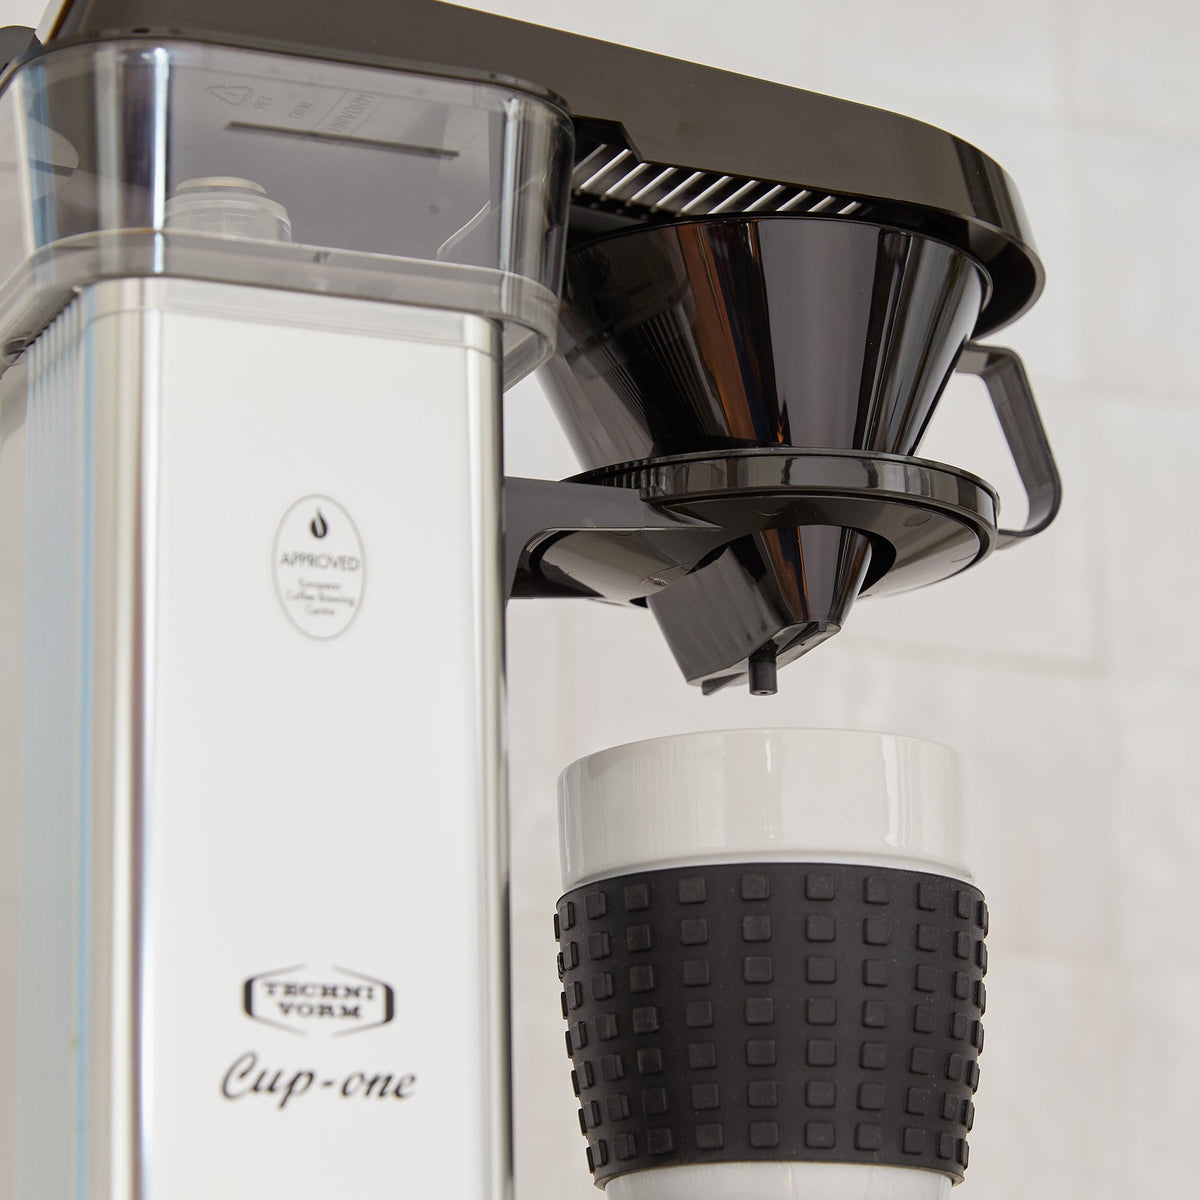 A close-up of the cup-one, focused on the drip brew basket and vented cover for the brew basket and water reservoir. The &#39;Approved by European Coffee Brewing Centre&#39; sticker is visble, and the Technivorm Cup-one badging.